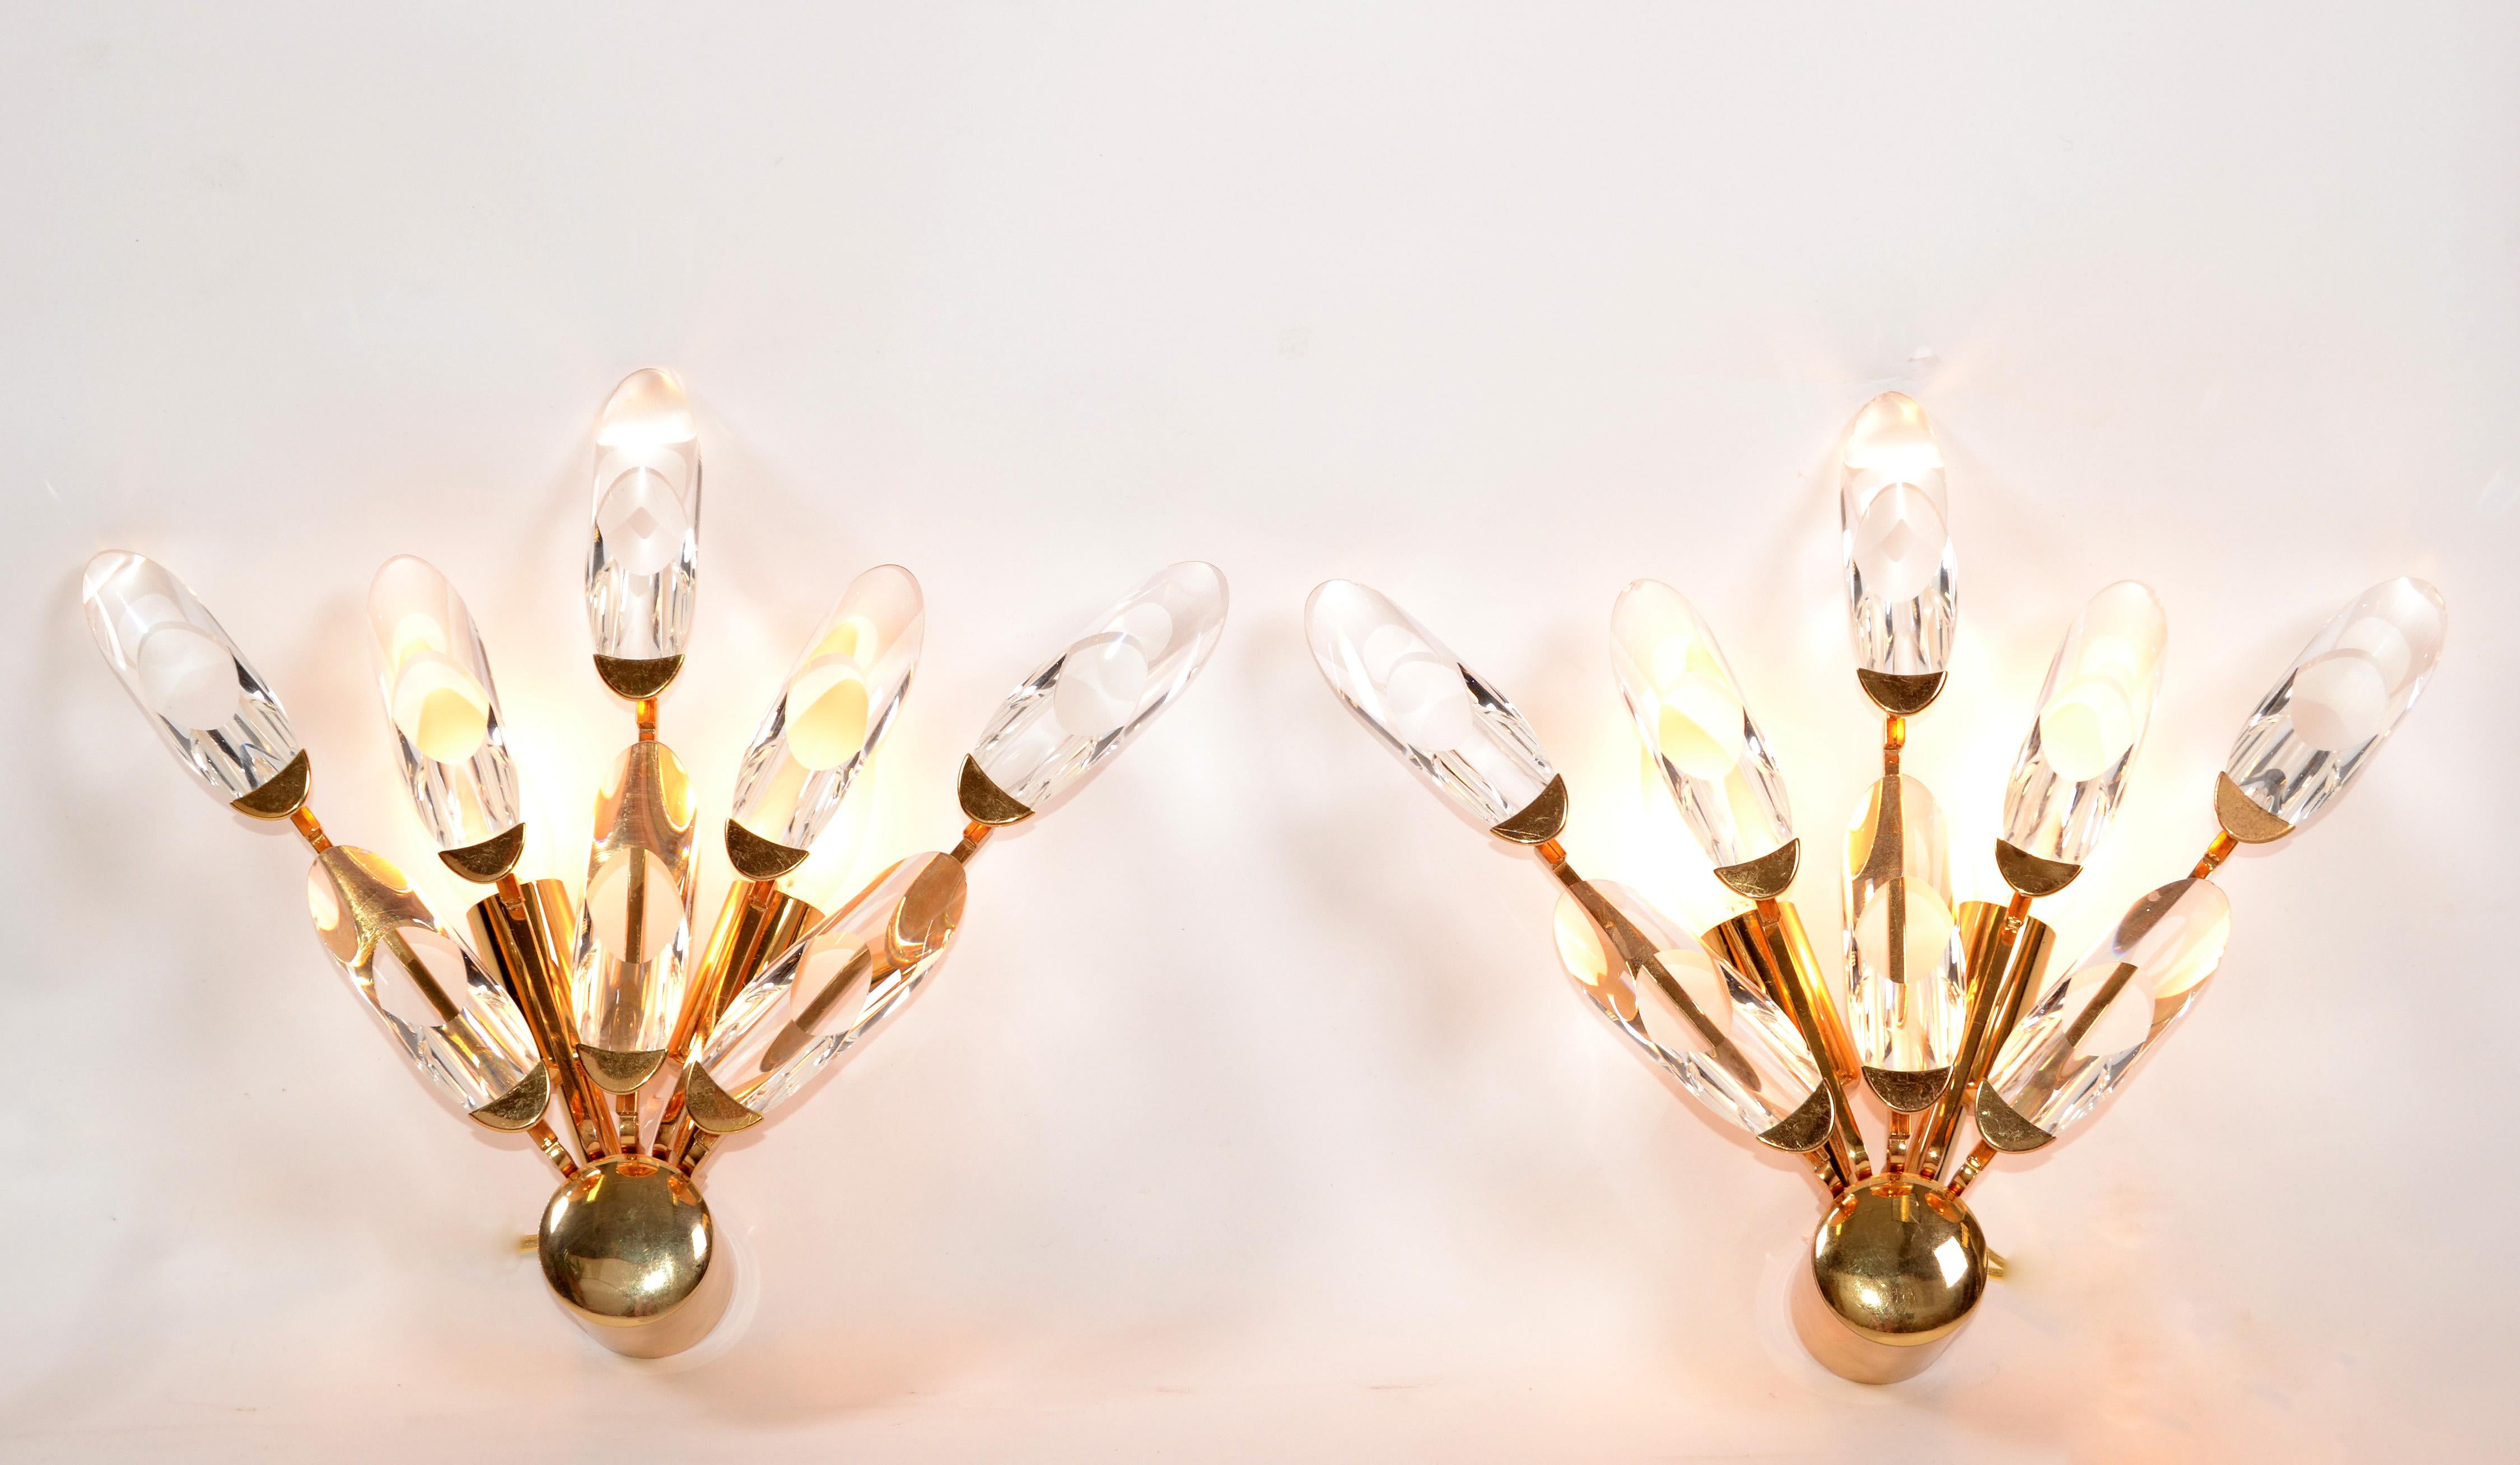 Italian Stilkronen Italy Brass and Crystal Sconces Mid-Century Modern, 2 Pairs Available For Sale